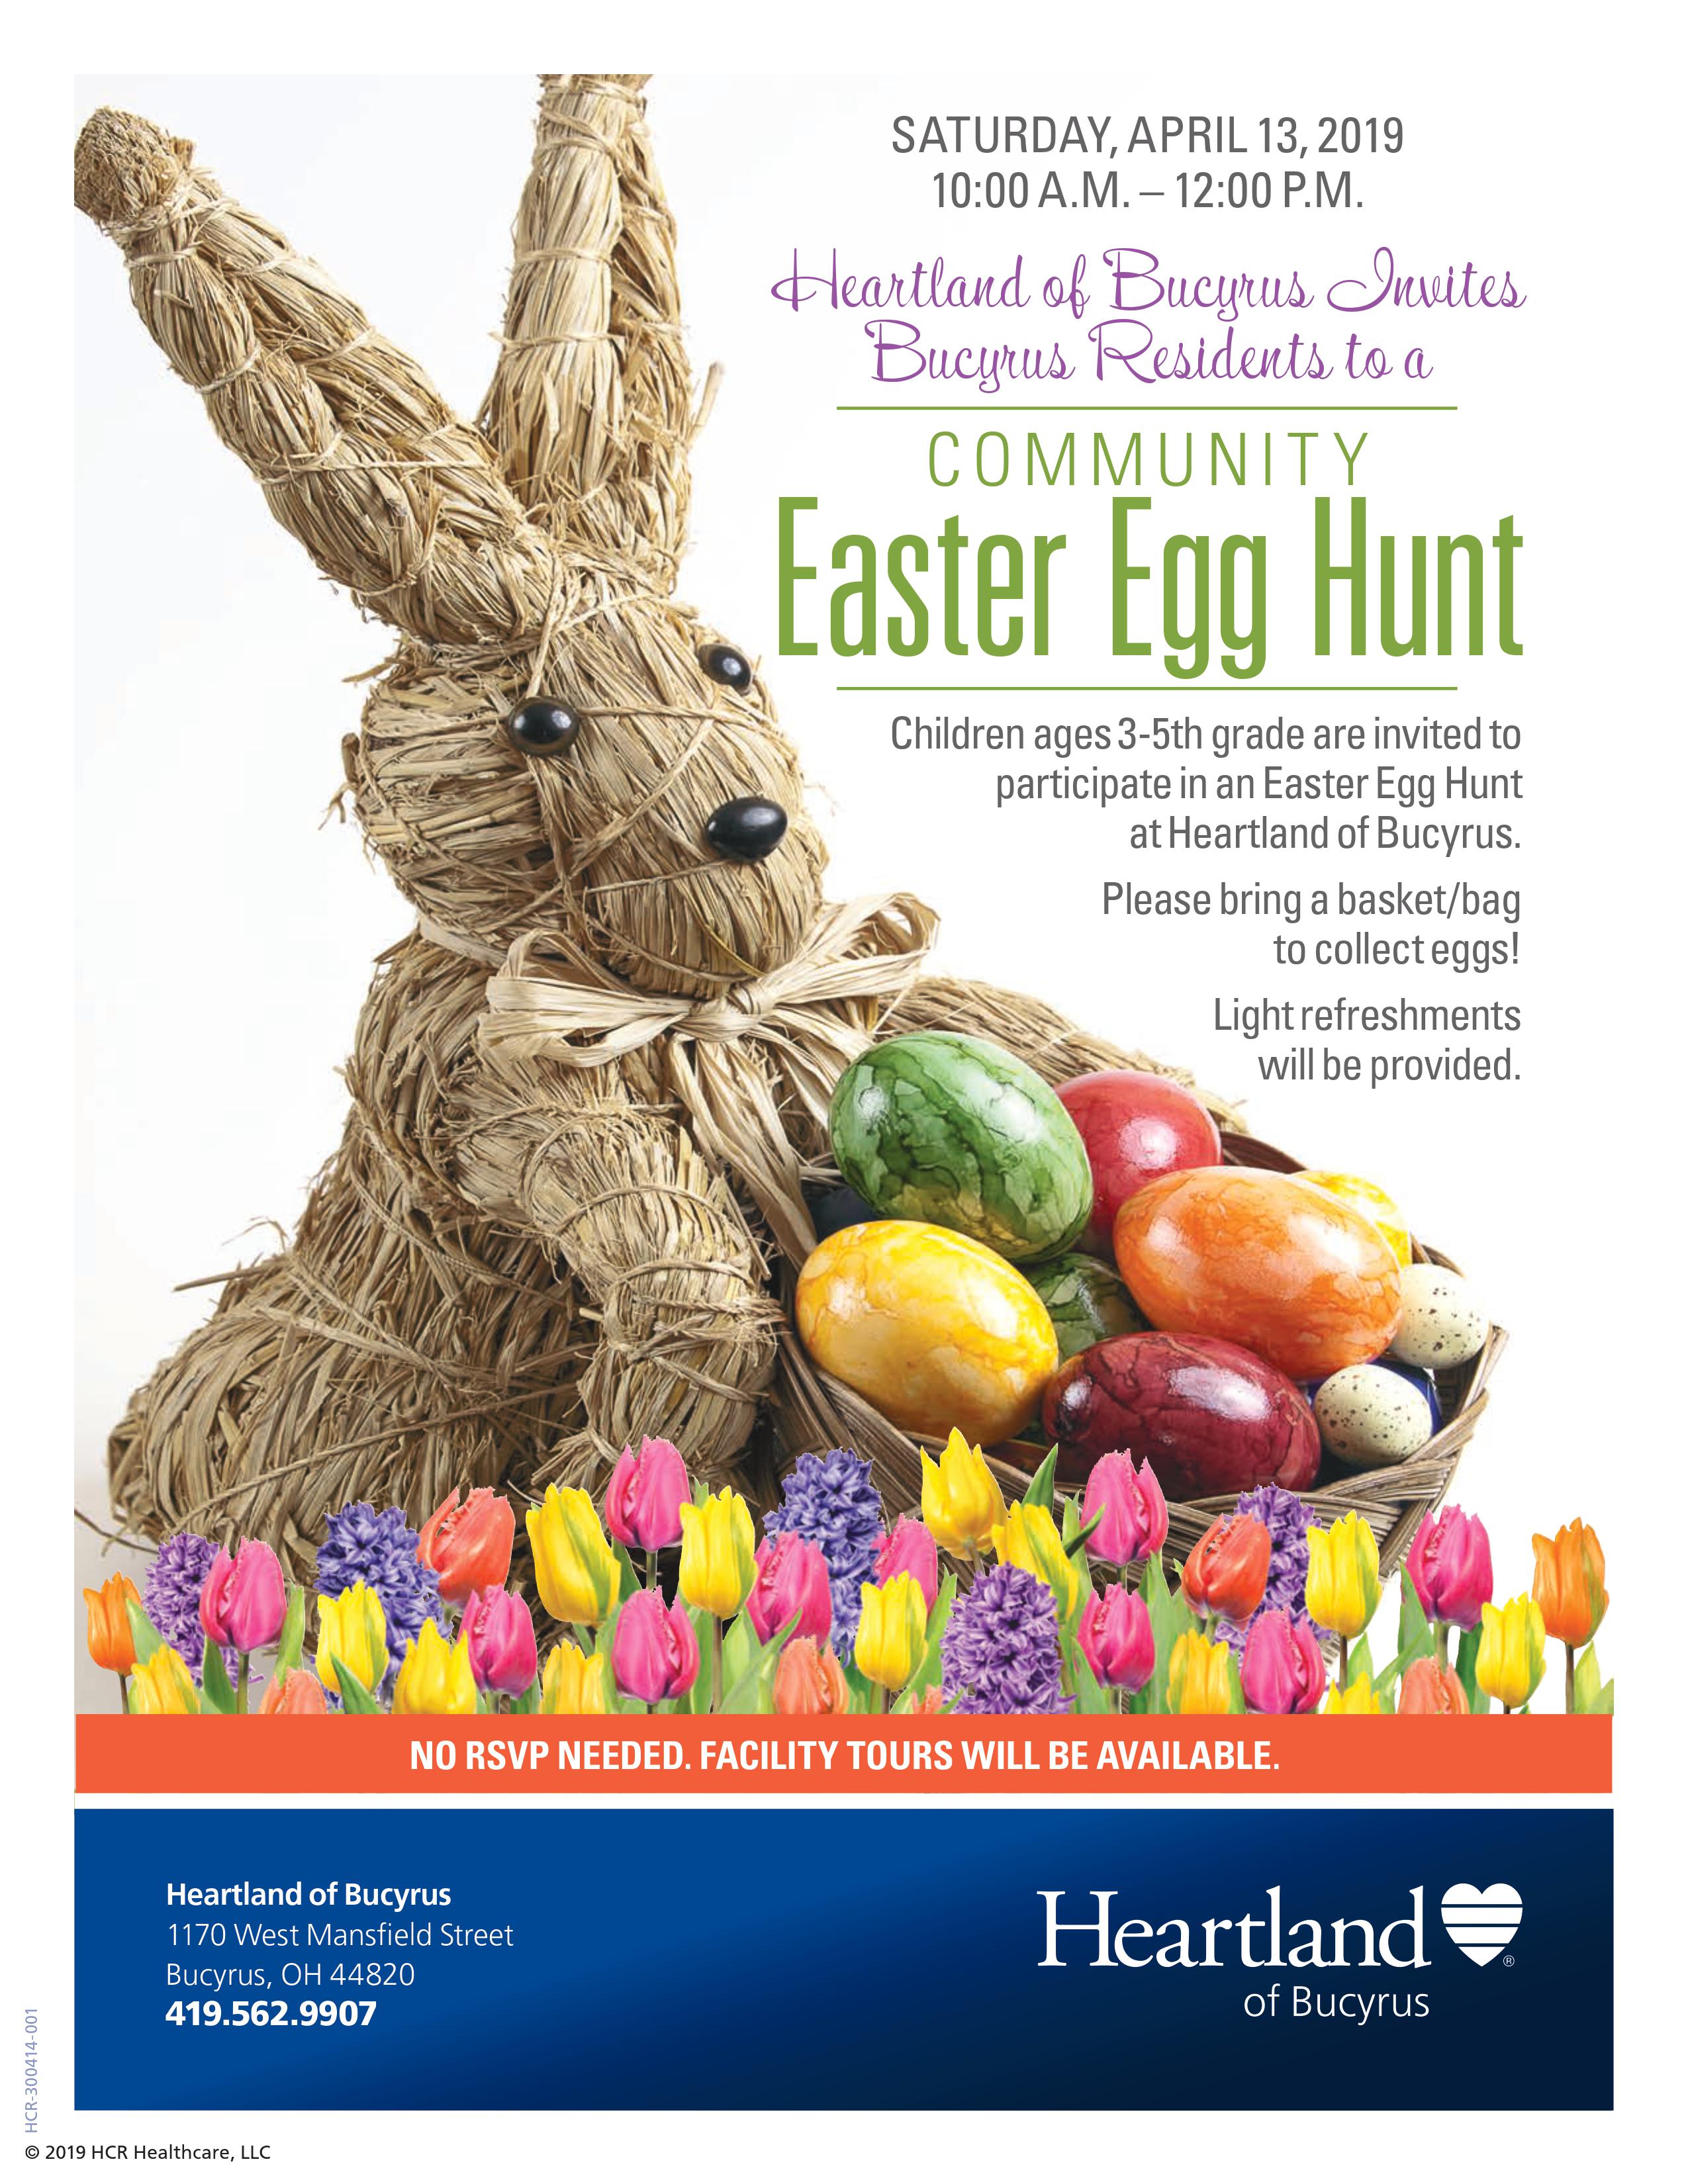 Heartland of Bucyrus Hosts Community Easter Egg Hunt – Bucyrus Area Chamber of Commerce